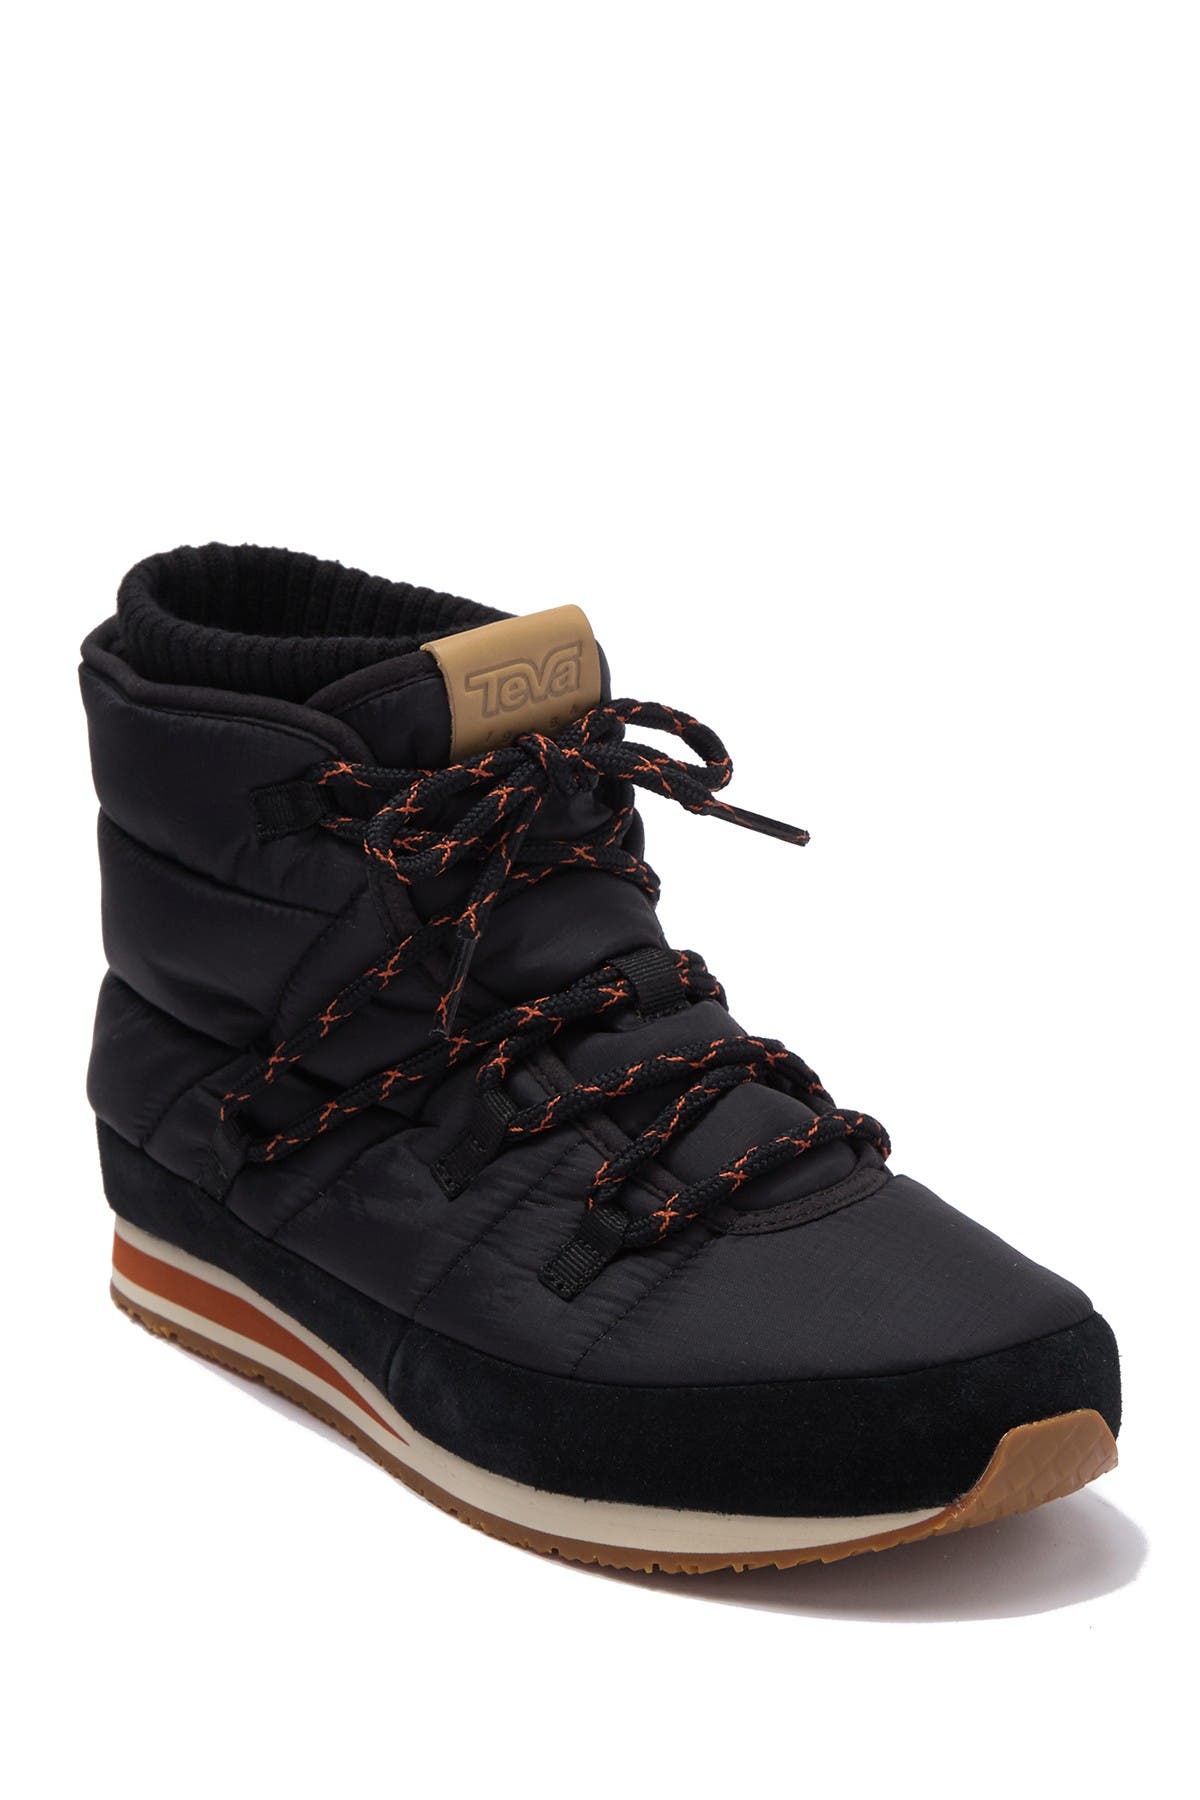 Teva | Ember Lace-Up Winter Bootie 